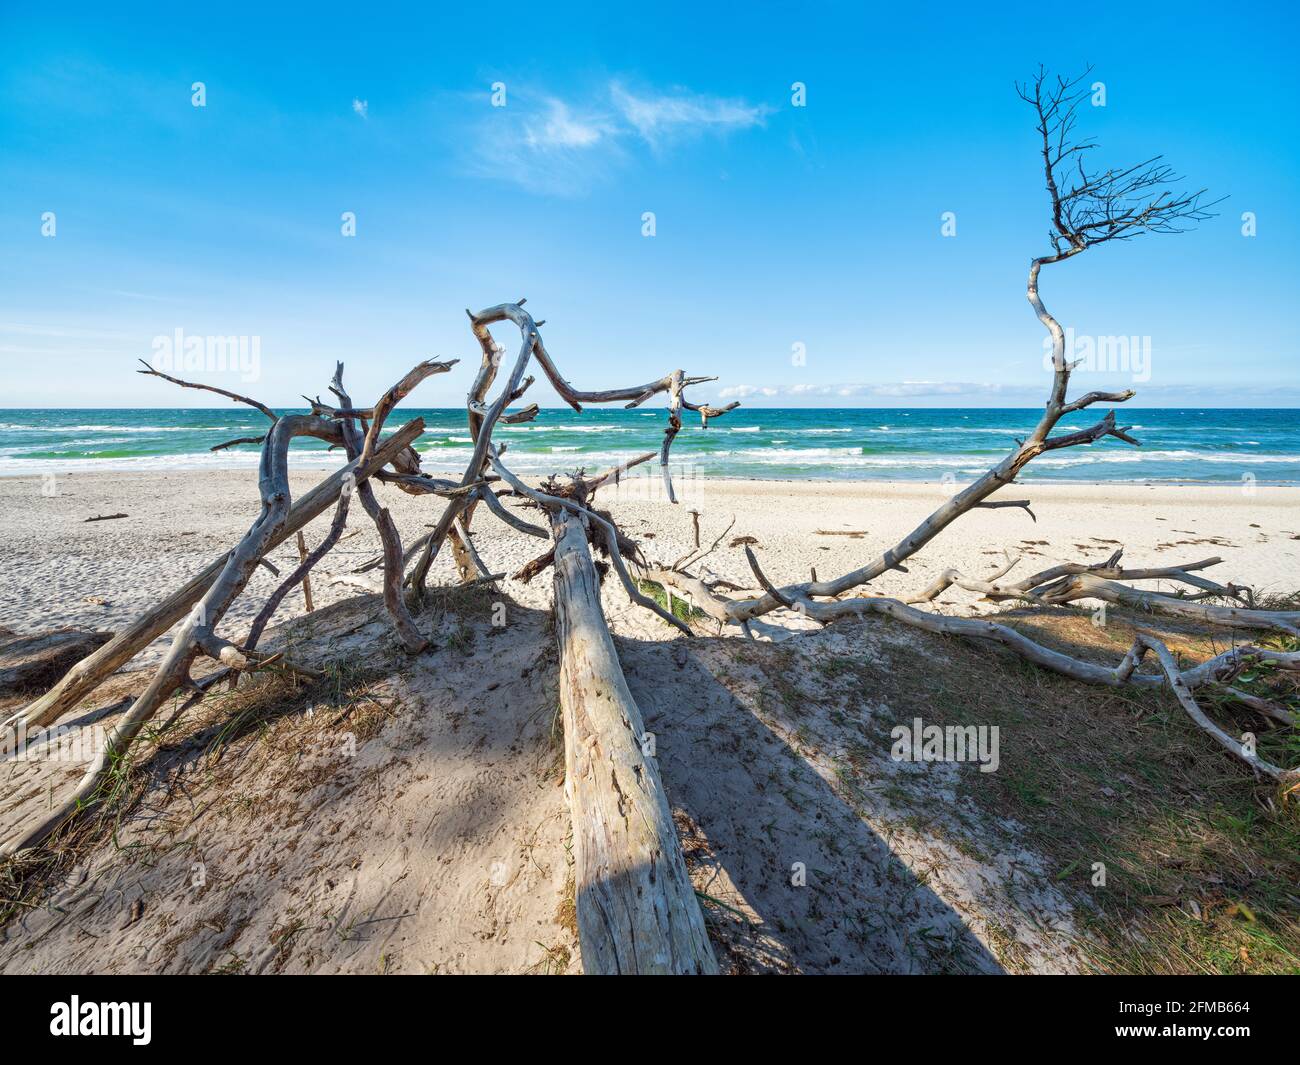 Uprooted tree on the beach of the Baltic Sea, sandy beach with dune, Fischland-Darß-Zingst peninsula, Western Pomerania Lagoon Area National Park, Mecklenburg-Western Pomerania, Germany Stock Photo